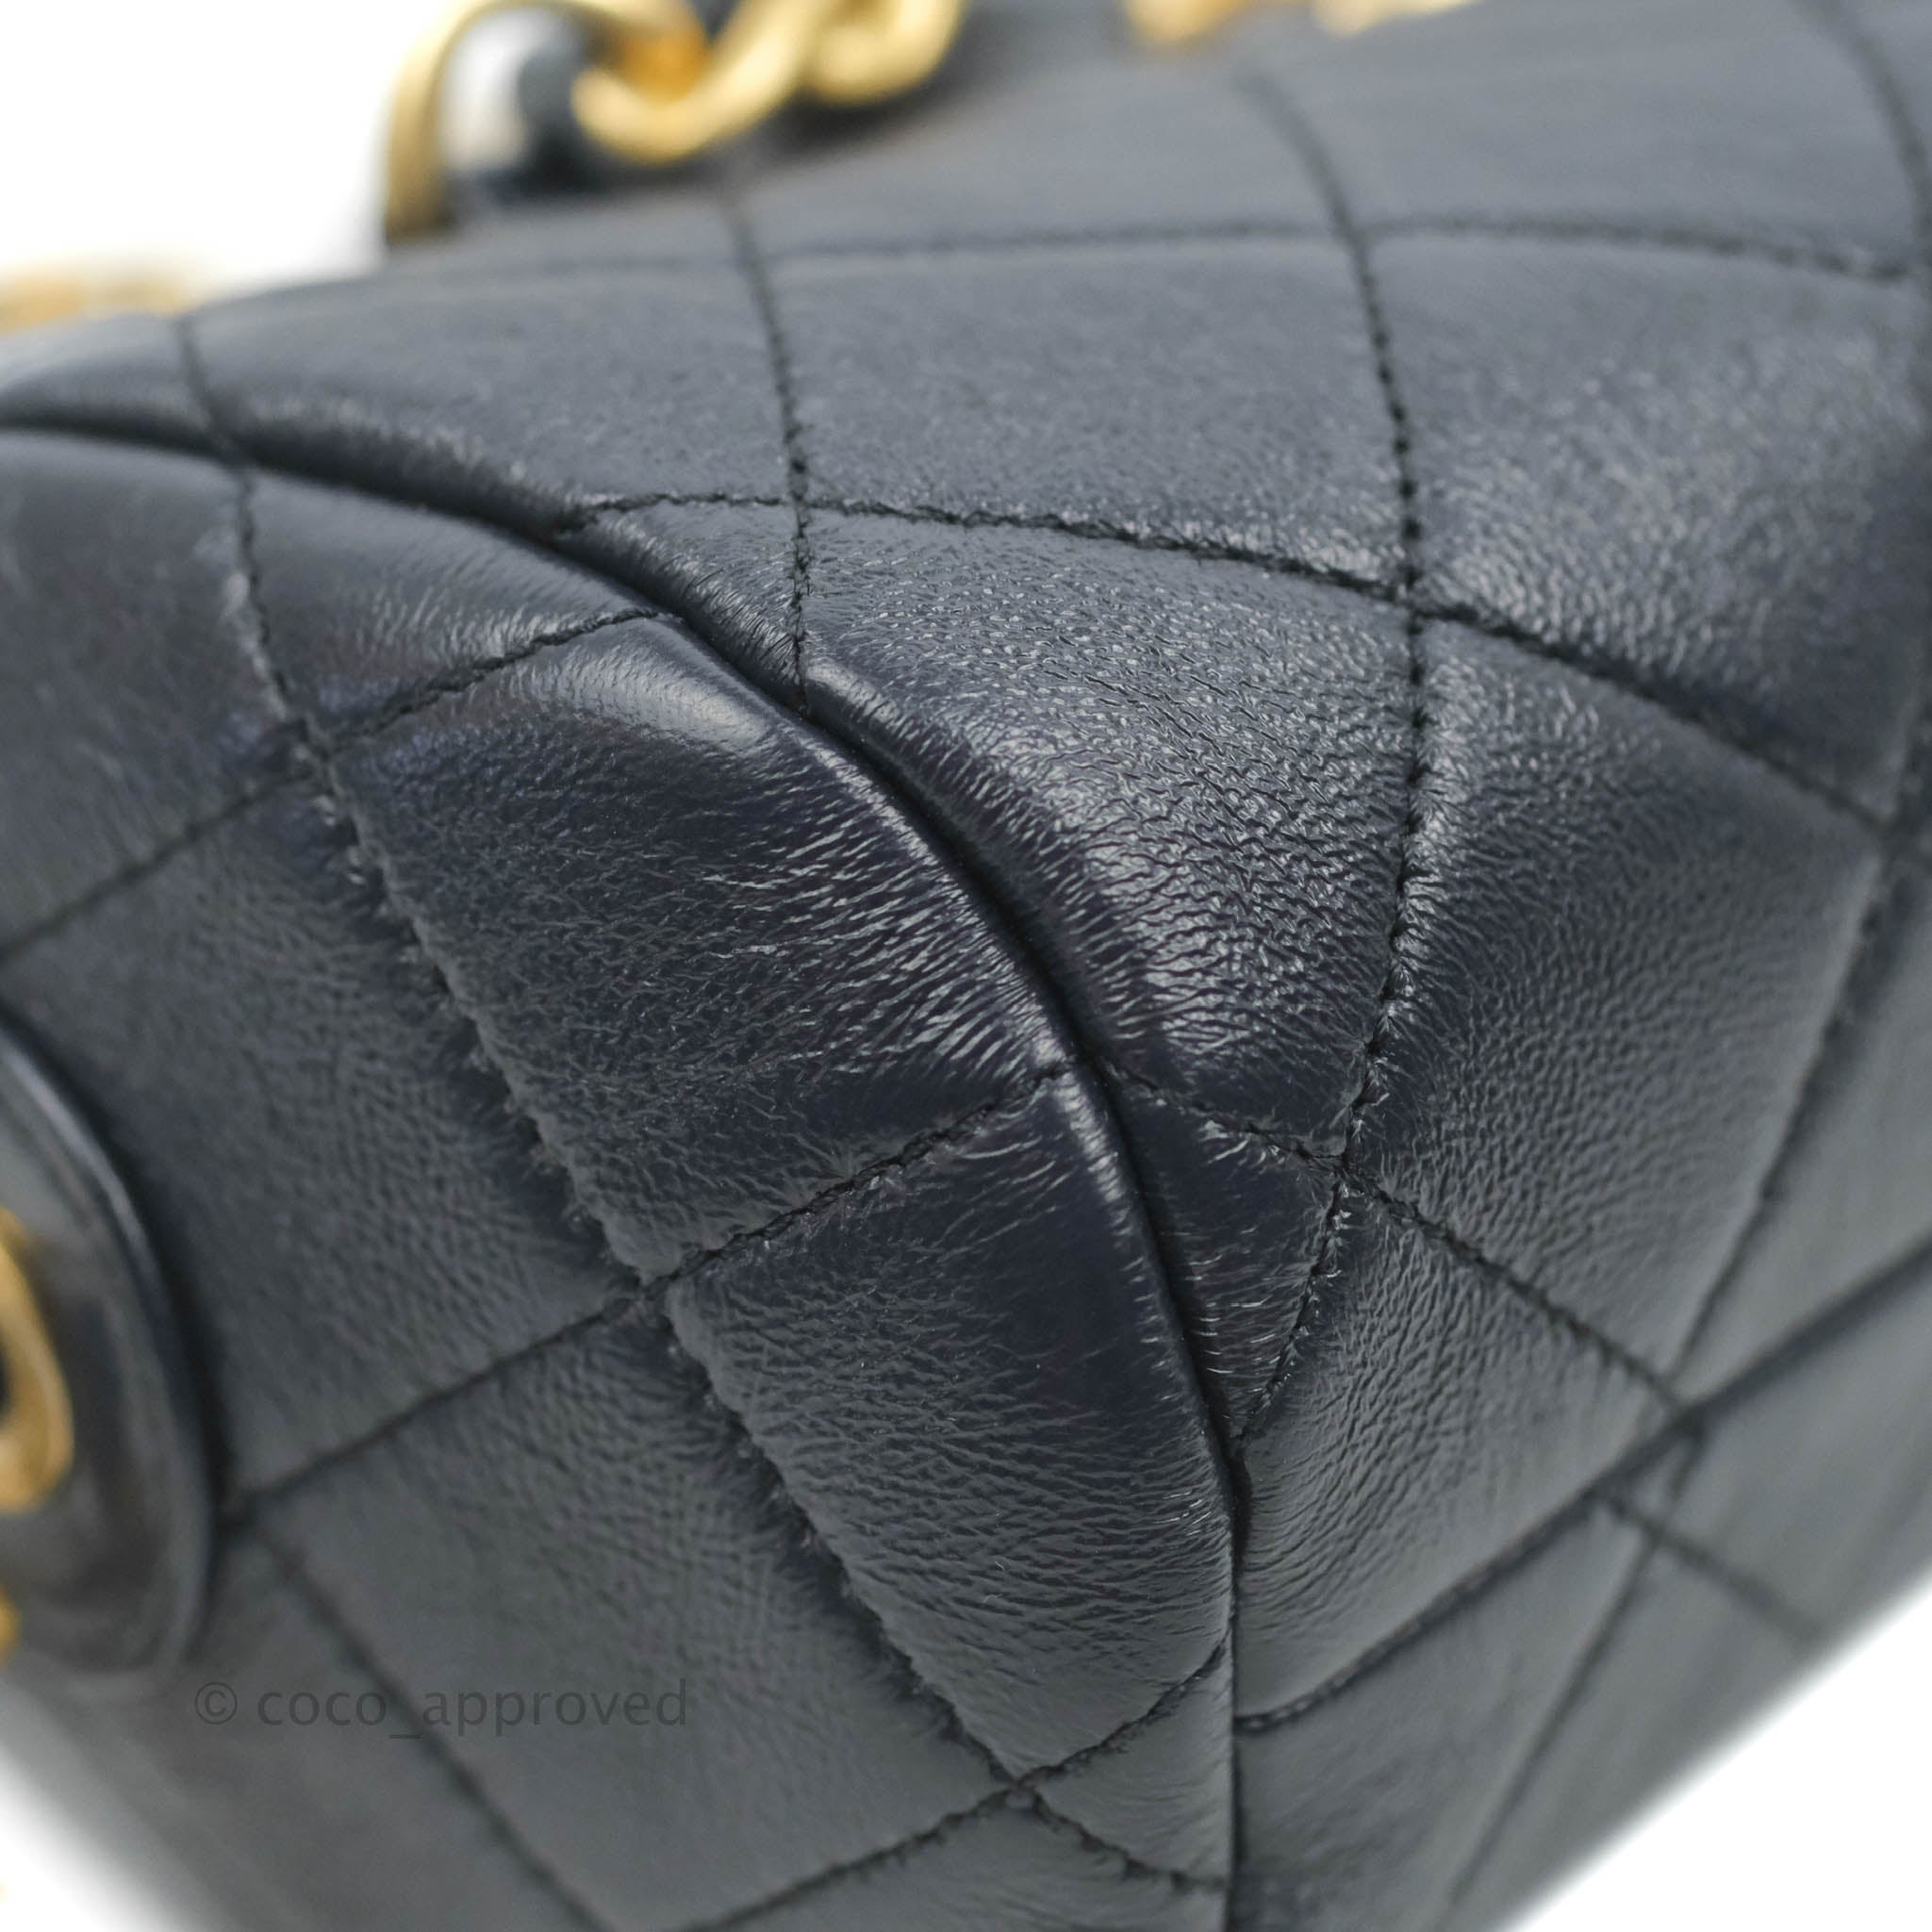 CHANEL Lambskin Quilted Trendy CC Bowling Bag Black 170387